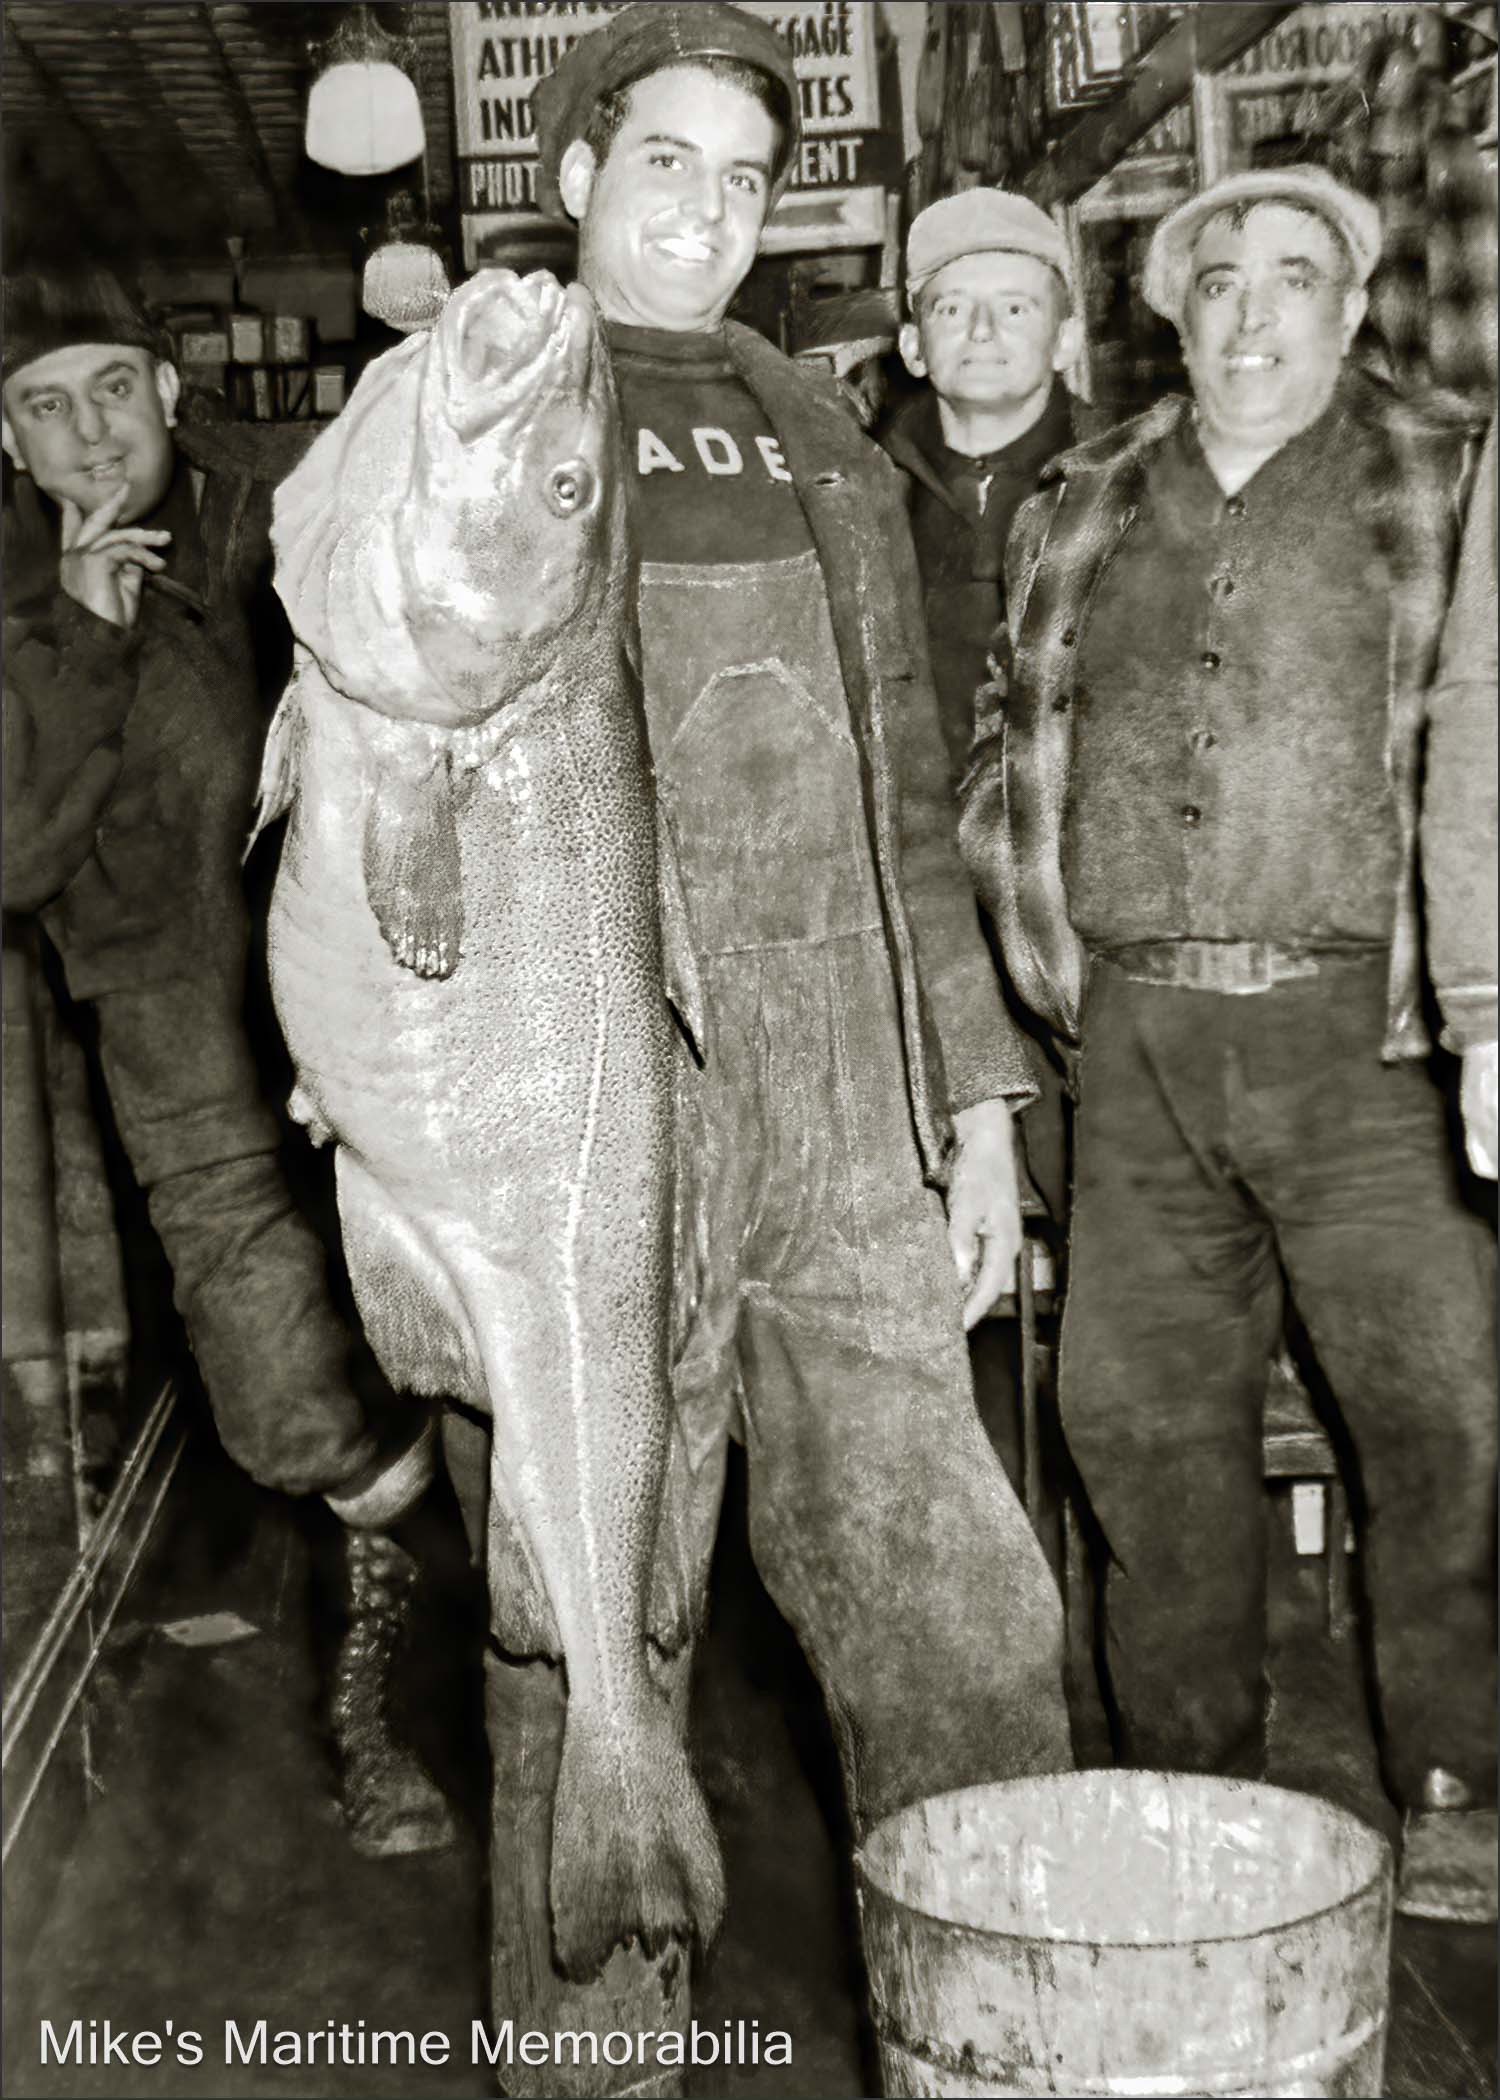 Anthony and Louis Castellano, Hoboken, NJ – 1939 Anthony Castellano hoists a jumbo codfish caught aboard the deep sea fishing boat "PALACE" during the fall of 1939. Looking on (on the right and wearing the plaid jacket) is his father, Louis Castellano. Louis Castellano was the founding father of the "PALACE" fishing fleet that was responsible for bringing the original "PALACE" to Hoboken, New Jersey in 1930. The "PALACE" name would continue in the party fishing boat business for the next 64 years. The photo is courtesy of Phil Castellano.